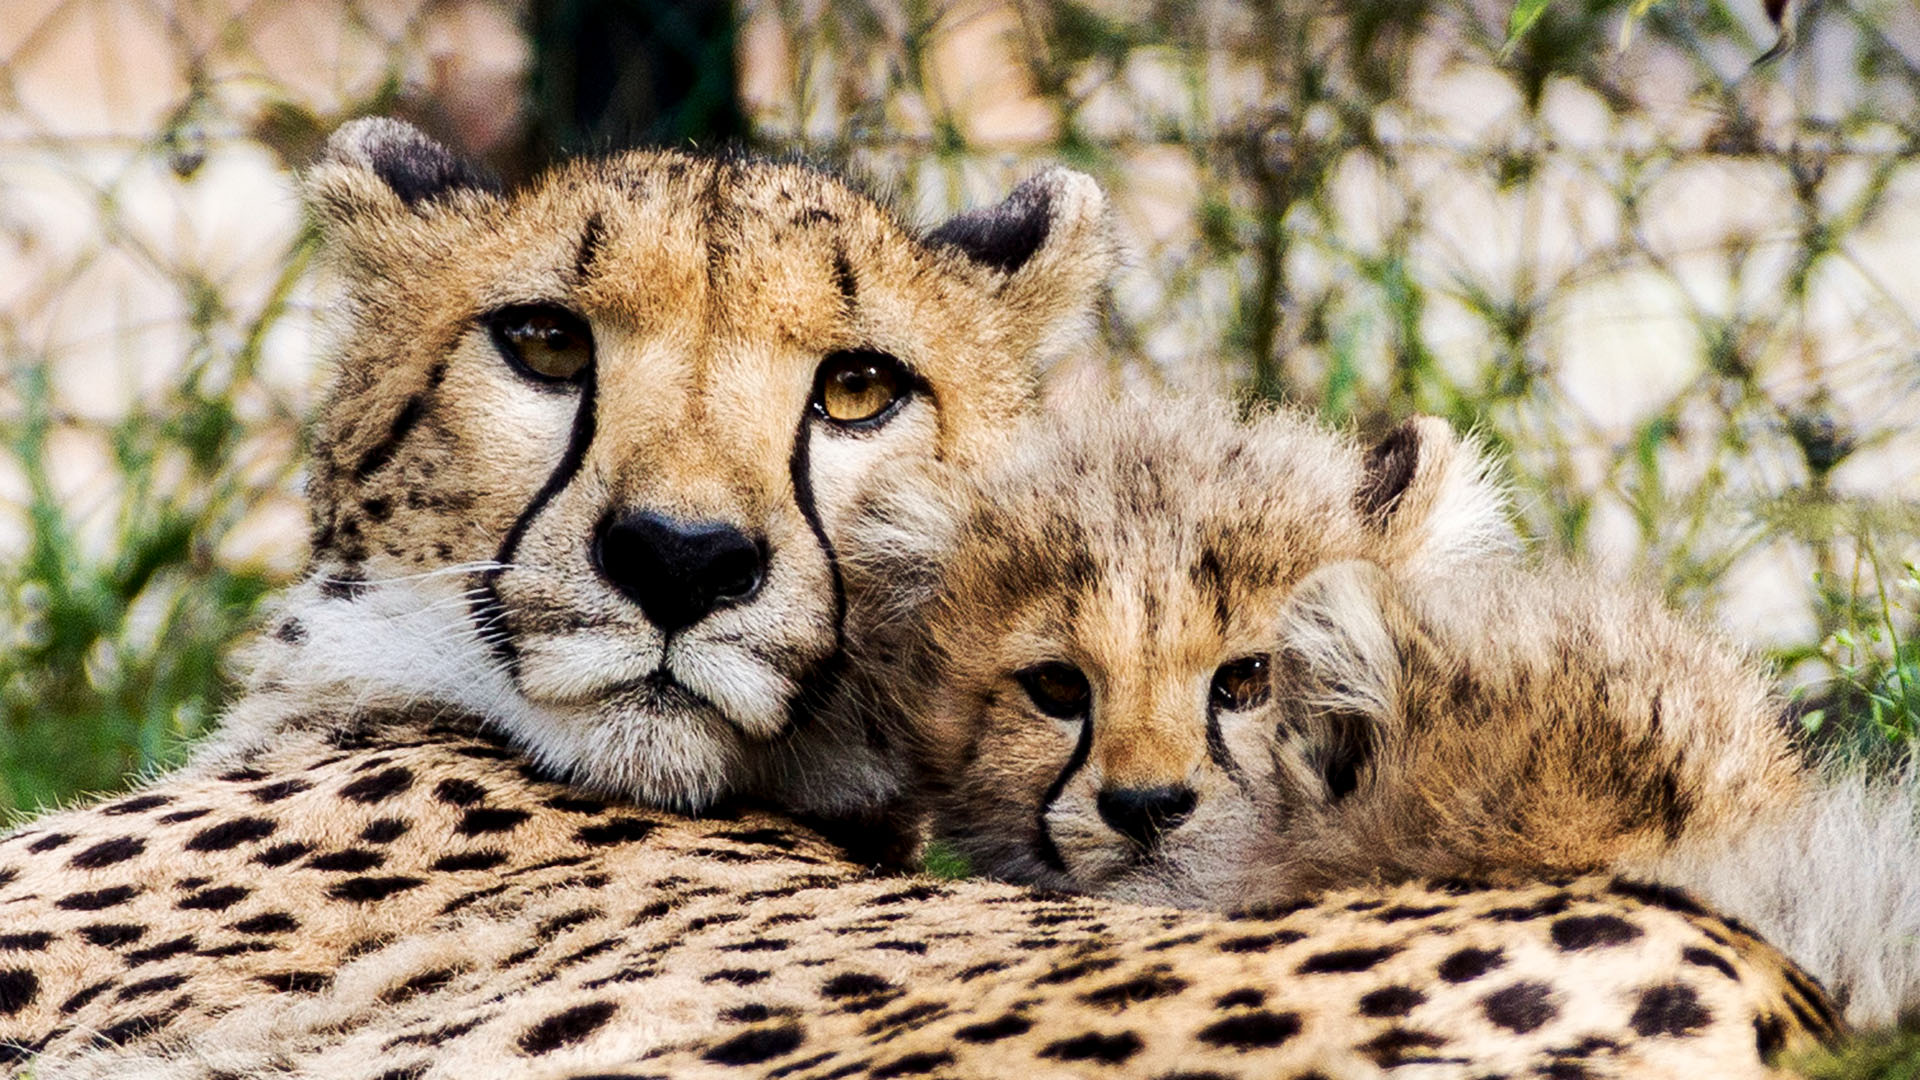 Wallpaper Cute Baby Cheetah Pictures Upload At October By